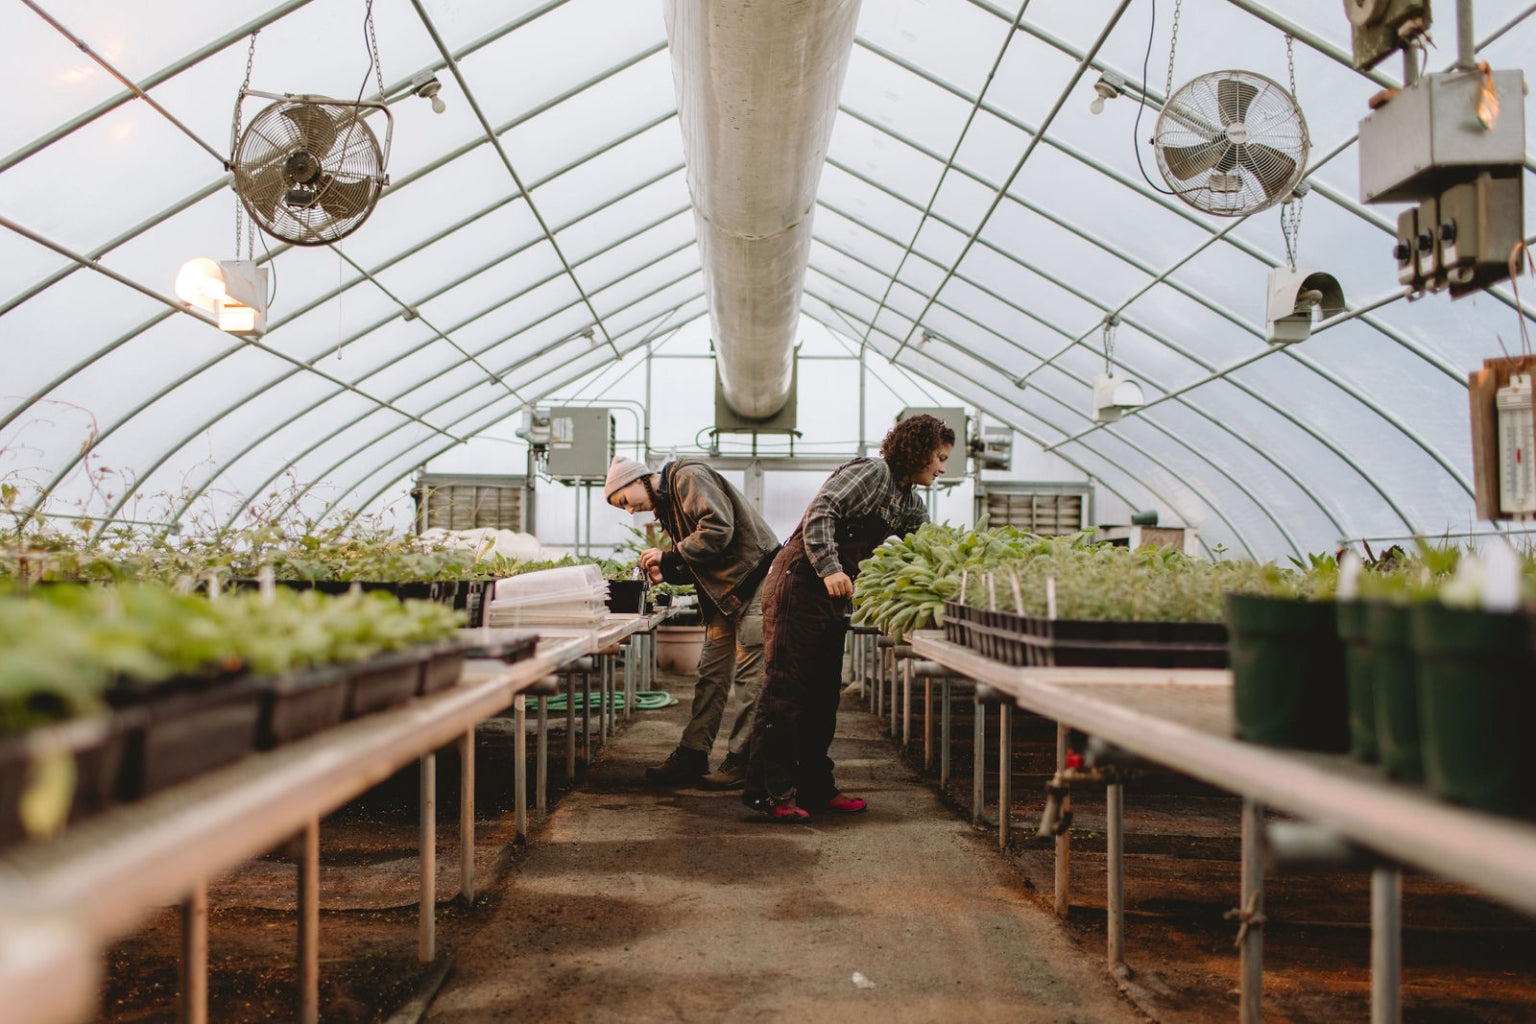 We might not be able to get haircuts right now, but plants can. Rodale’s interns prep more than 200 varieties of certified organic plant starts, which sometimes means giving them “haircuts” to promote leaf growth.